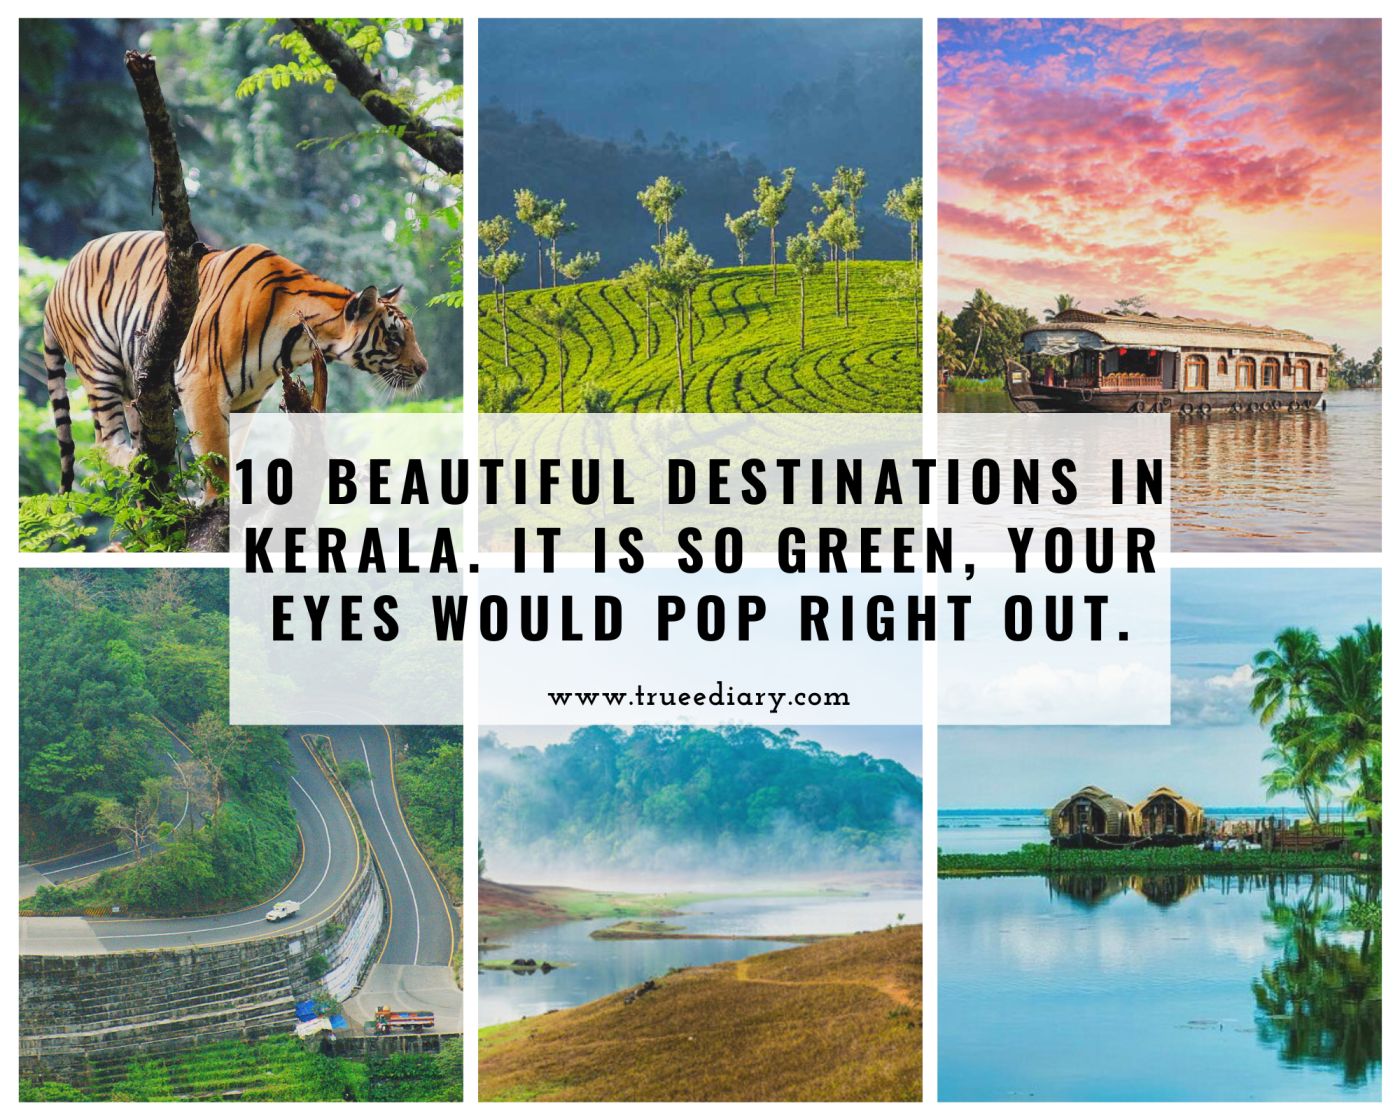 10 Beautiful Destinations In Kerala. It Is So Green, Your Eyes Would Pop Right Out.